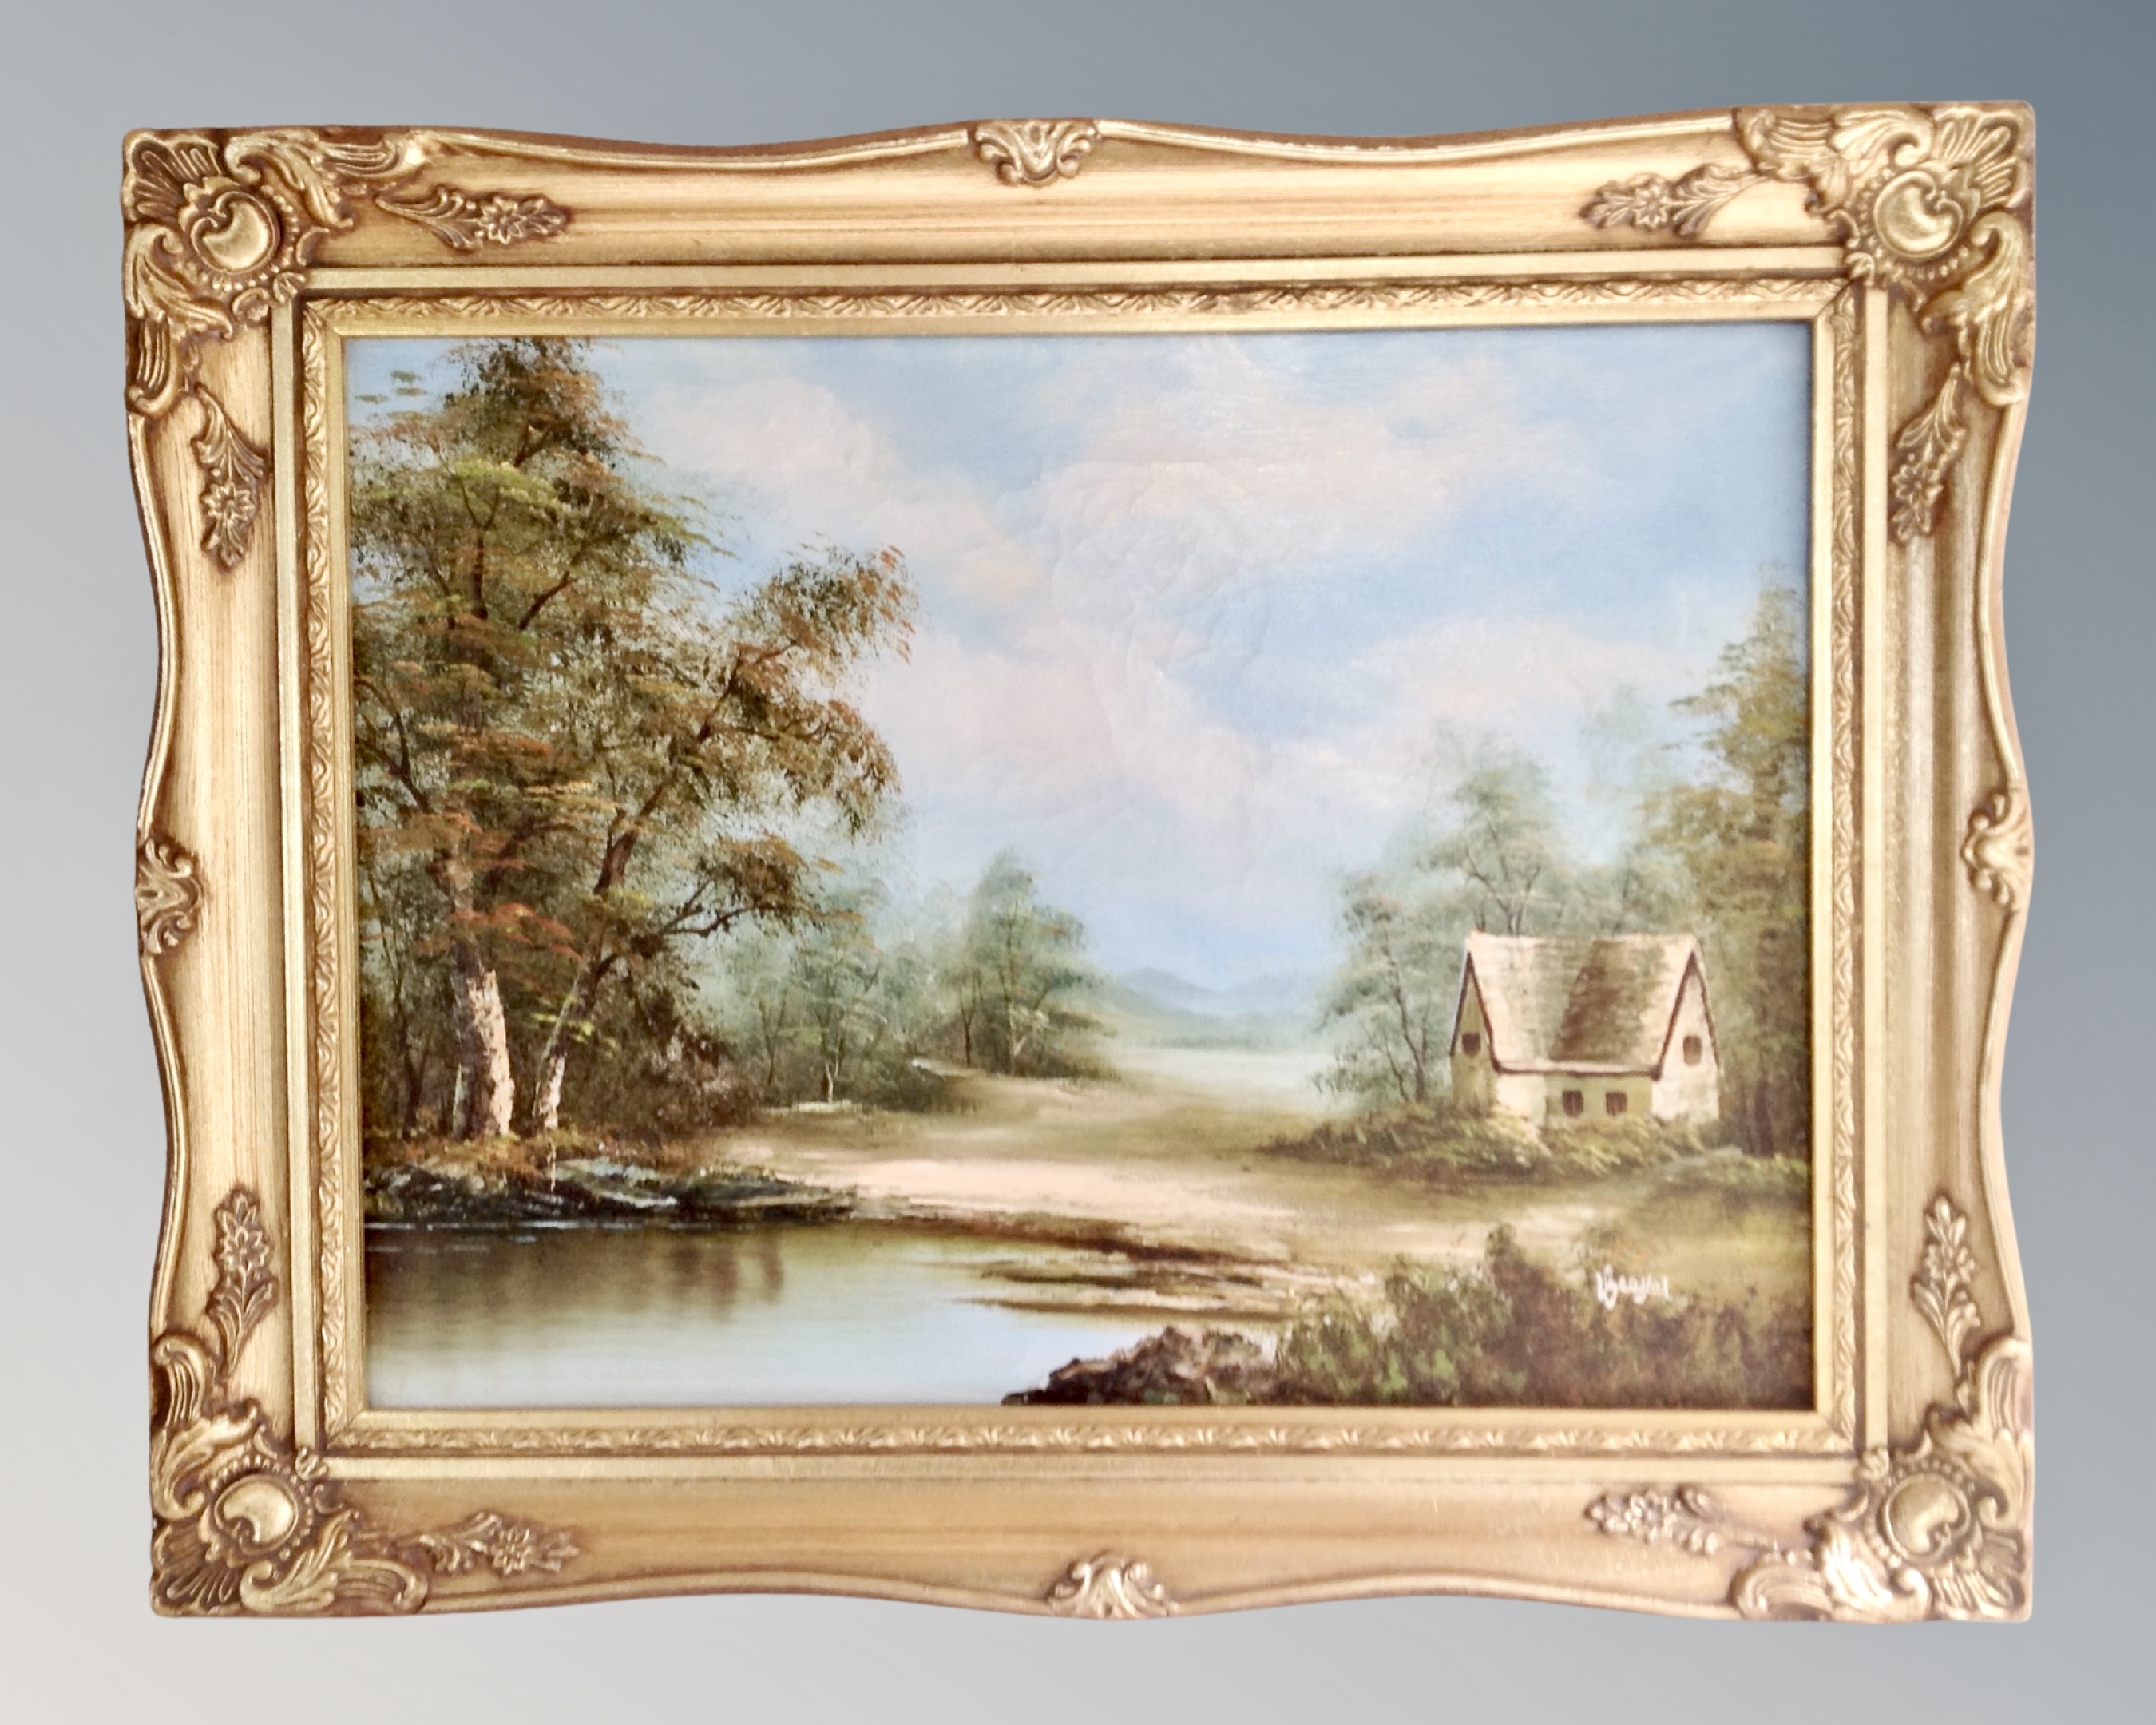 Contemporary school : Cottage by a river, oil on canvas, indistinctly signed, 39cm by 29cm.